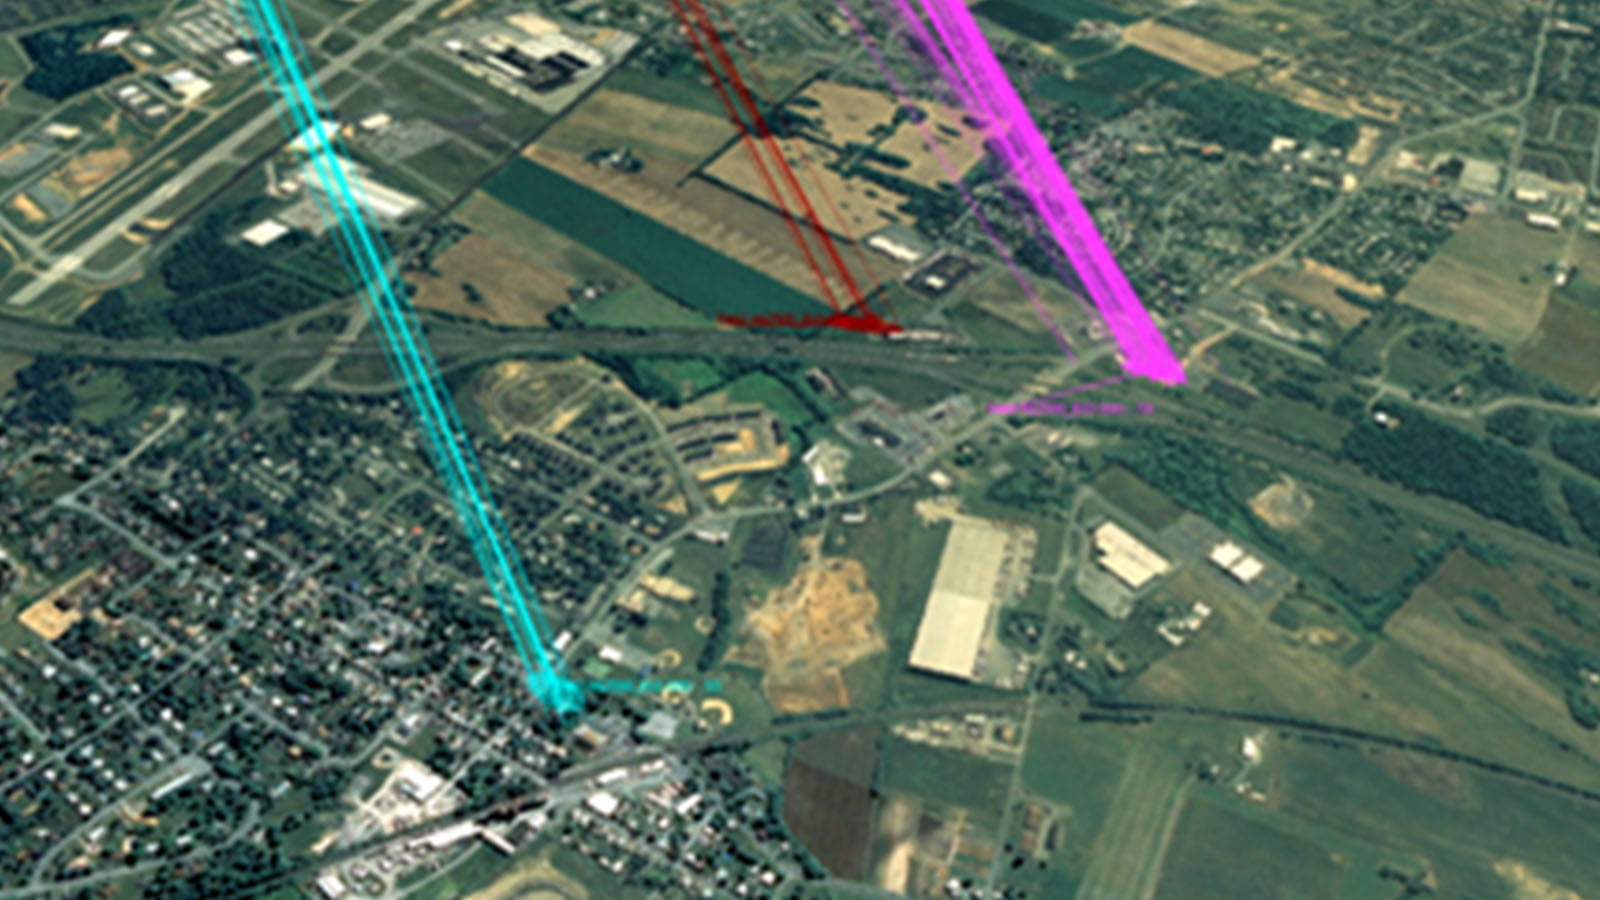 Aerial image of a city with cyan, red, and purple signals overlaid